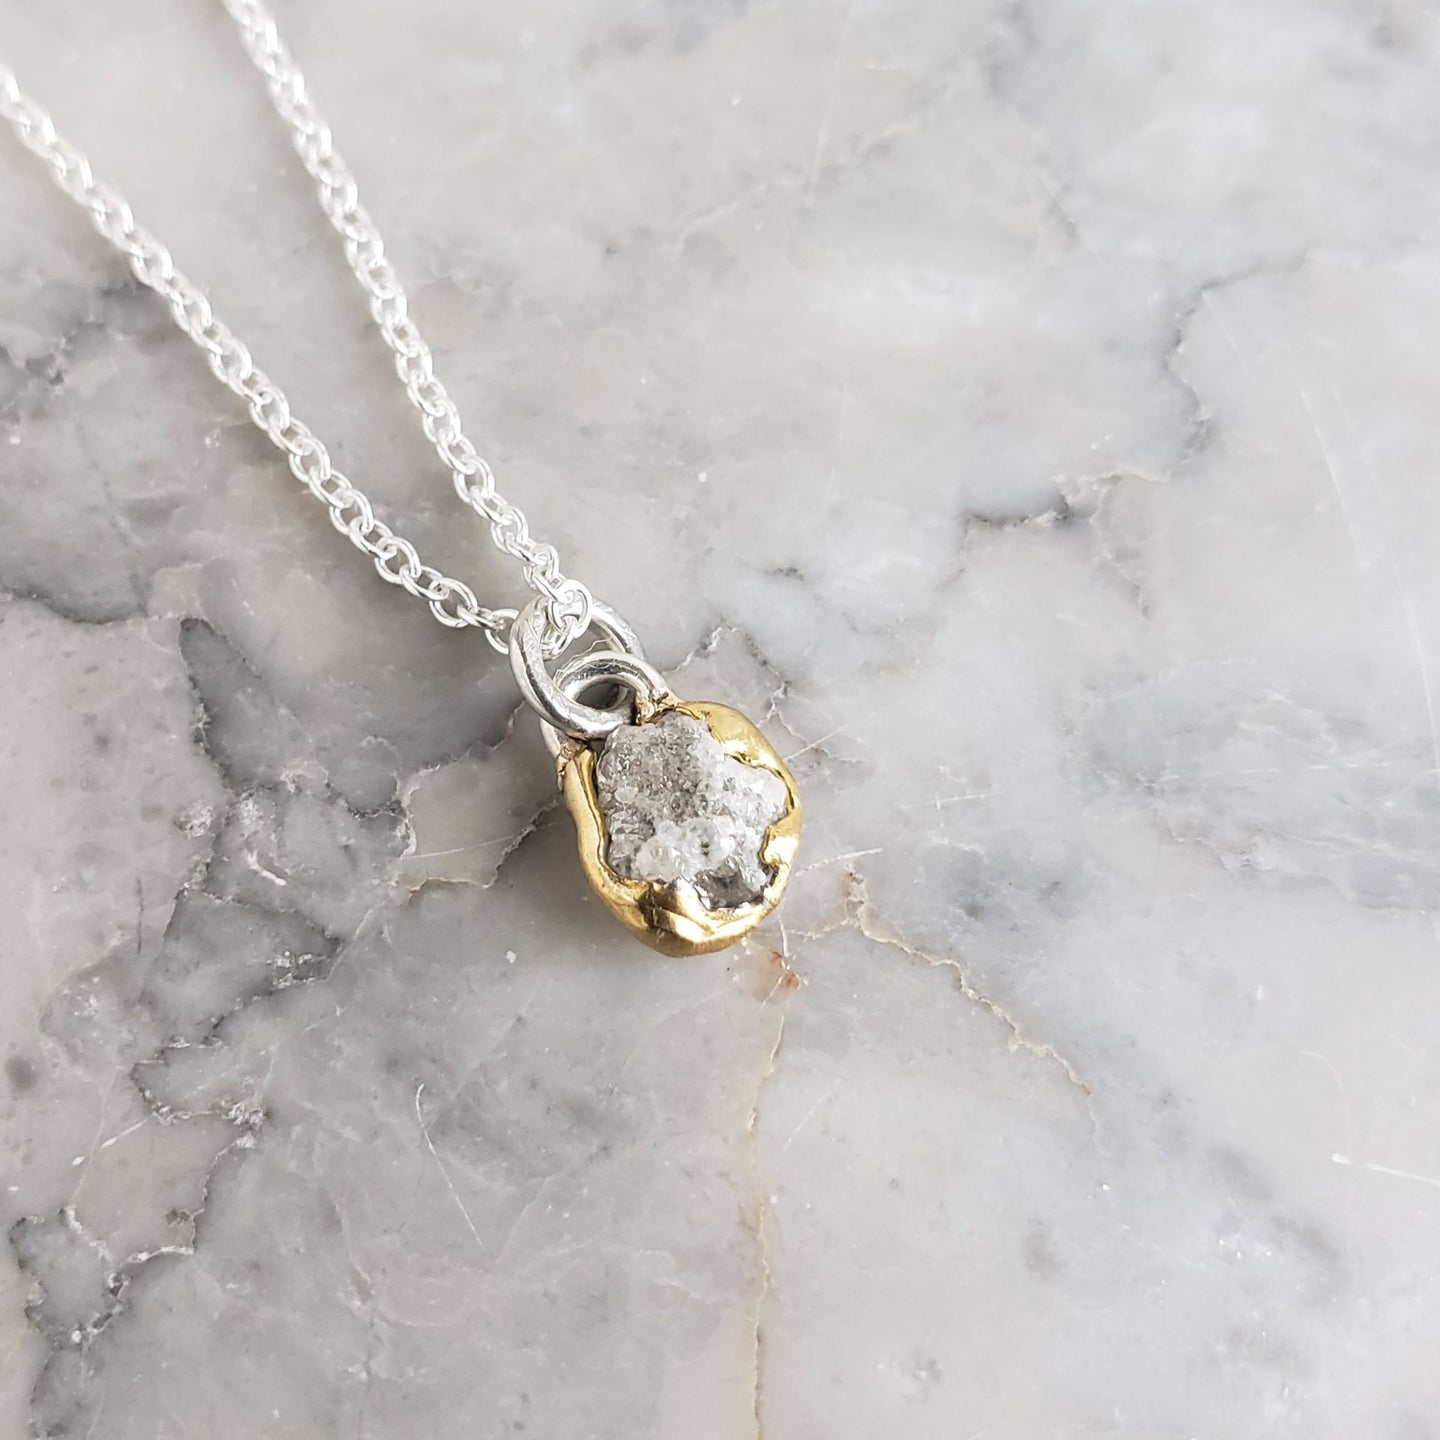 Rough Diamond Necklace in Bronze and Silver